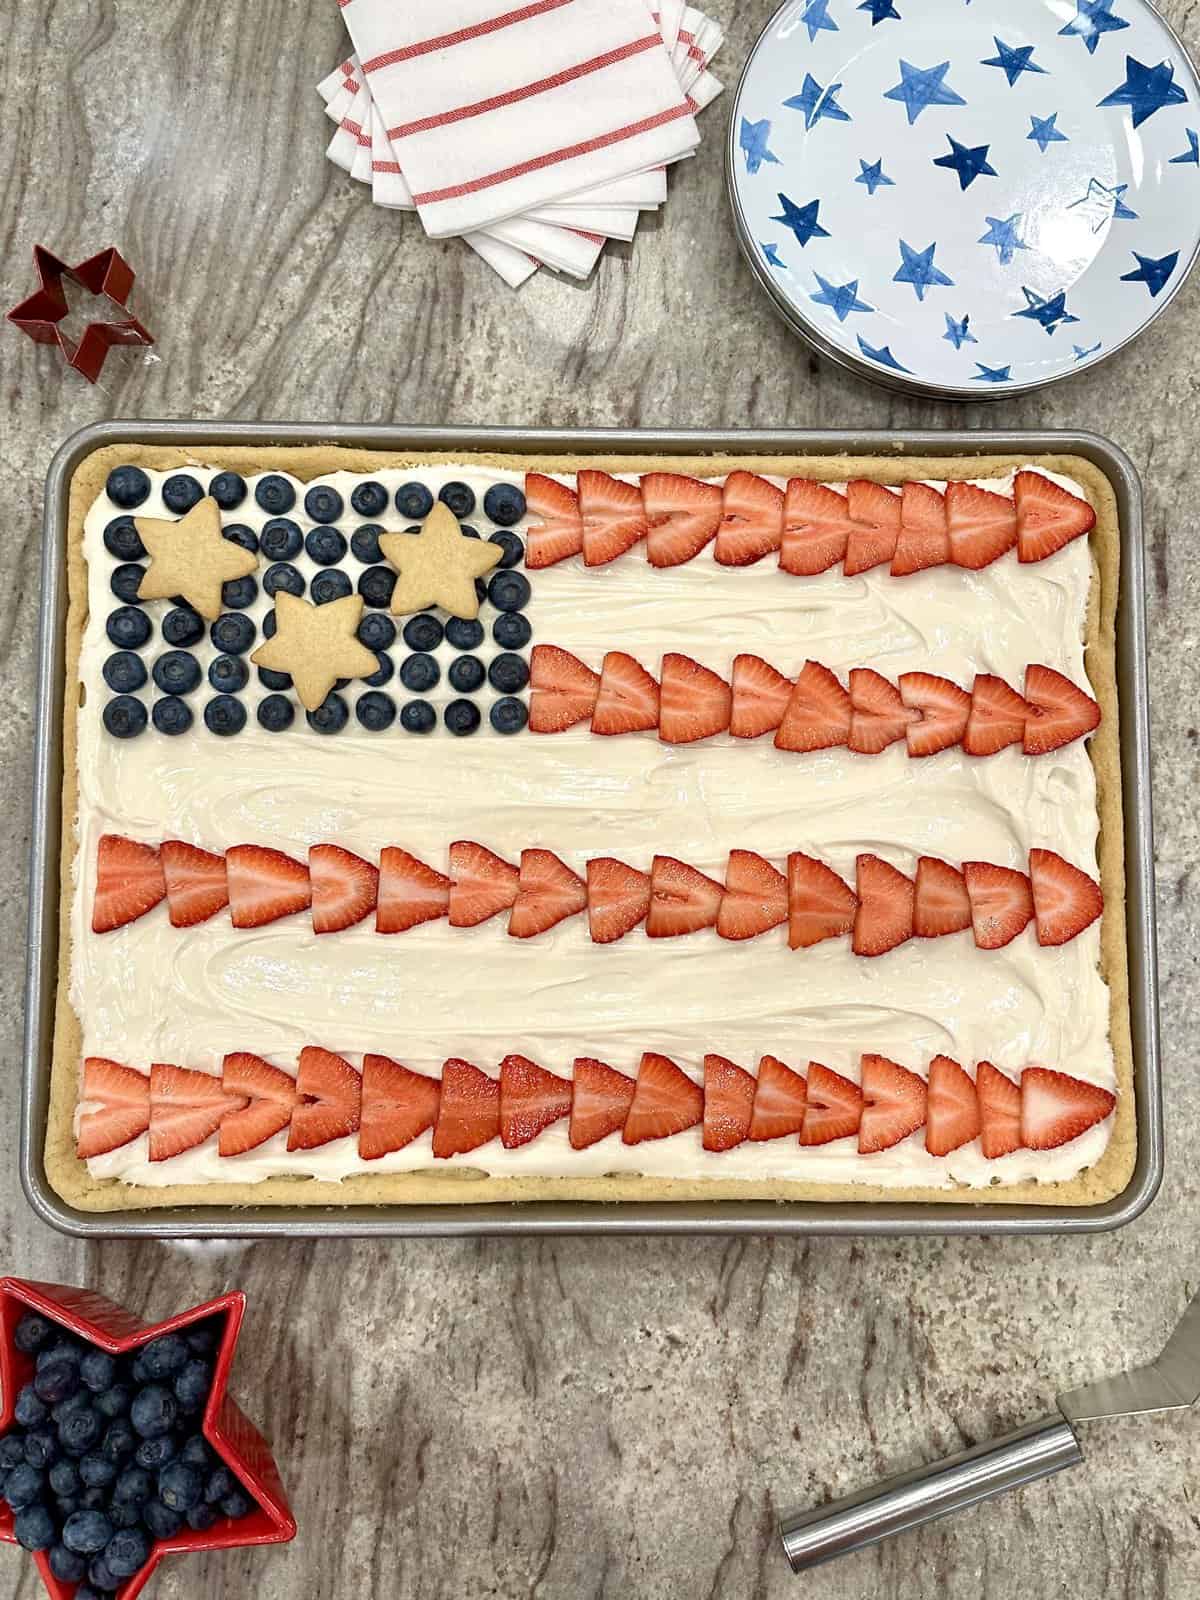 A rimmed cookie sheet with a large sugar cookie frosted and decorated like an American Flag using sliced strawberries, fresh blueberries and star cookies.